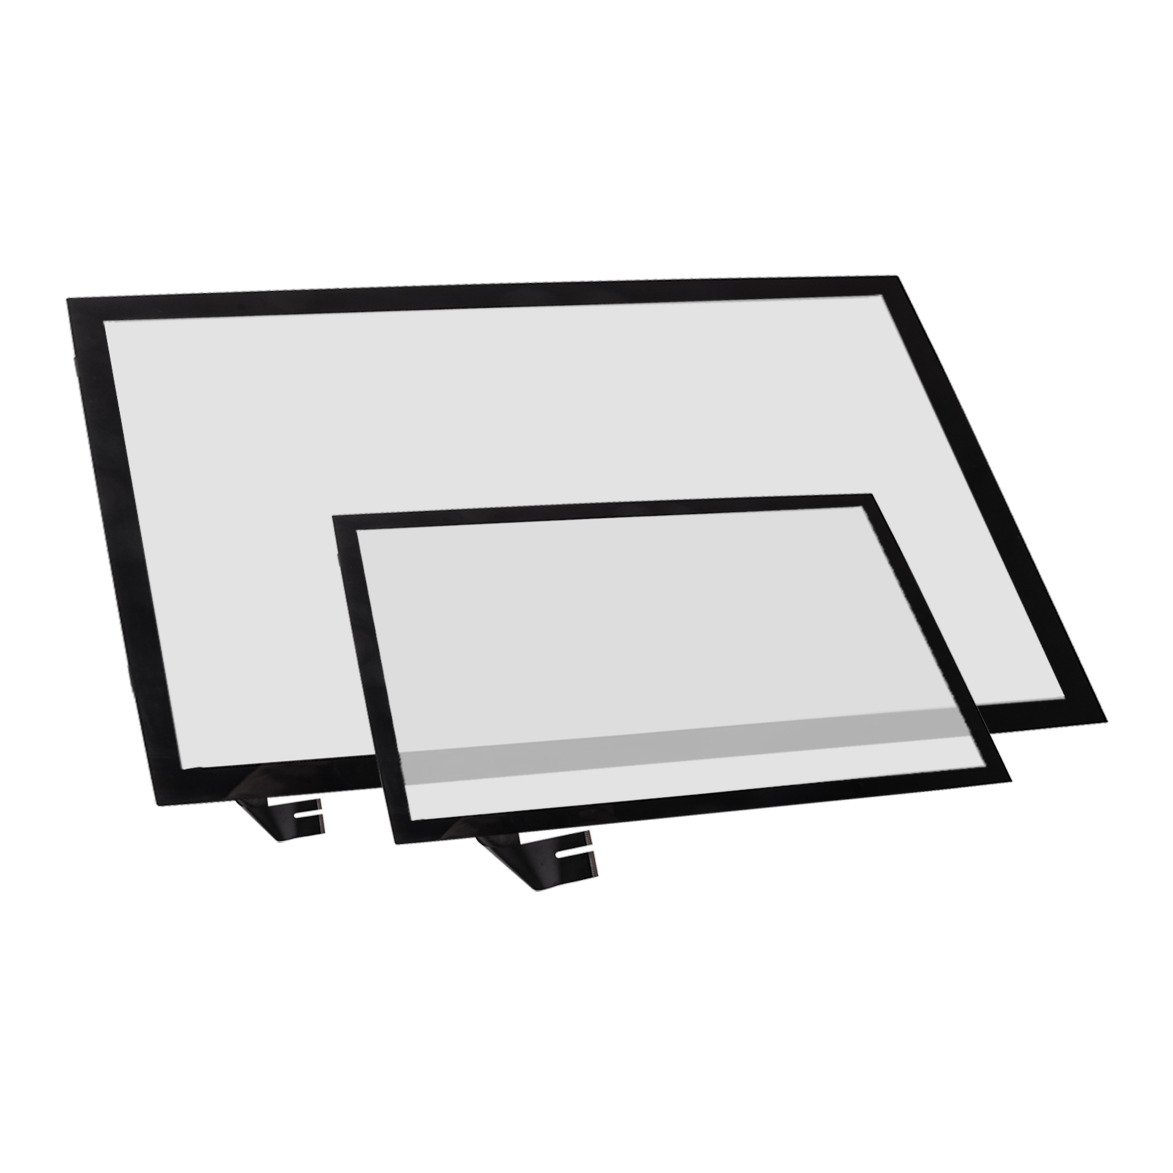 31.5 inch PCAP Touch Panel